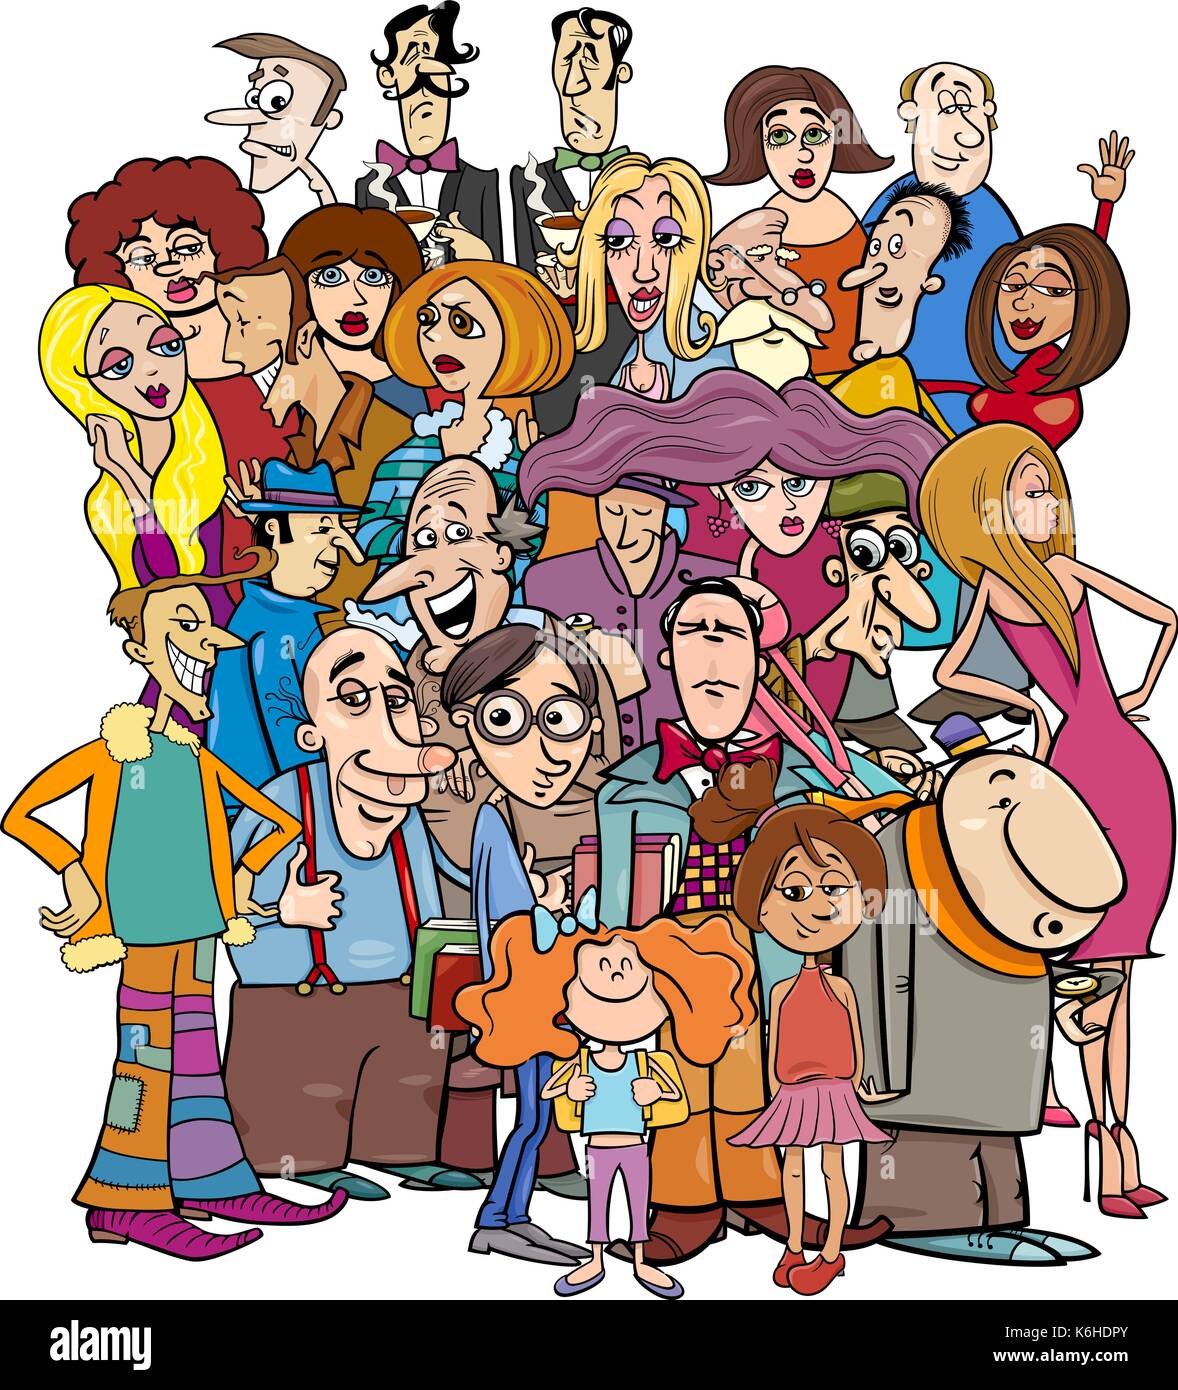 Cartoon Illustration of Many People Characters in the Crowd Stock Vector. 